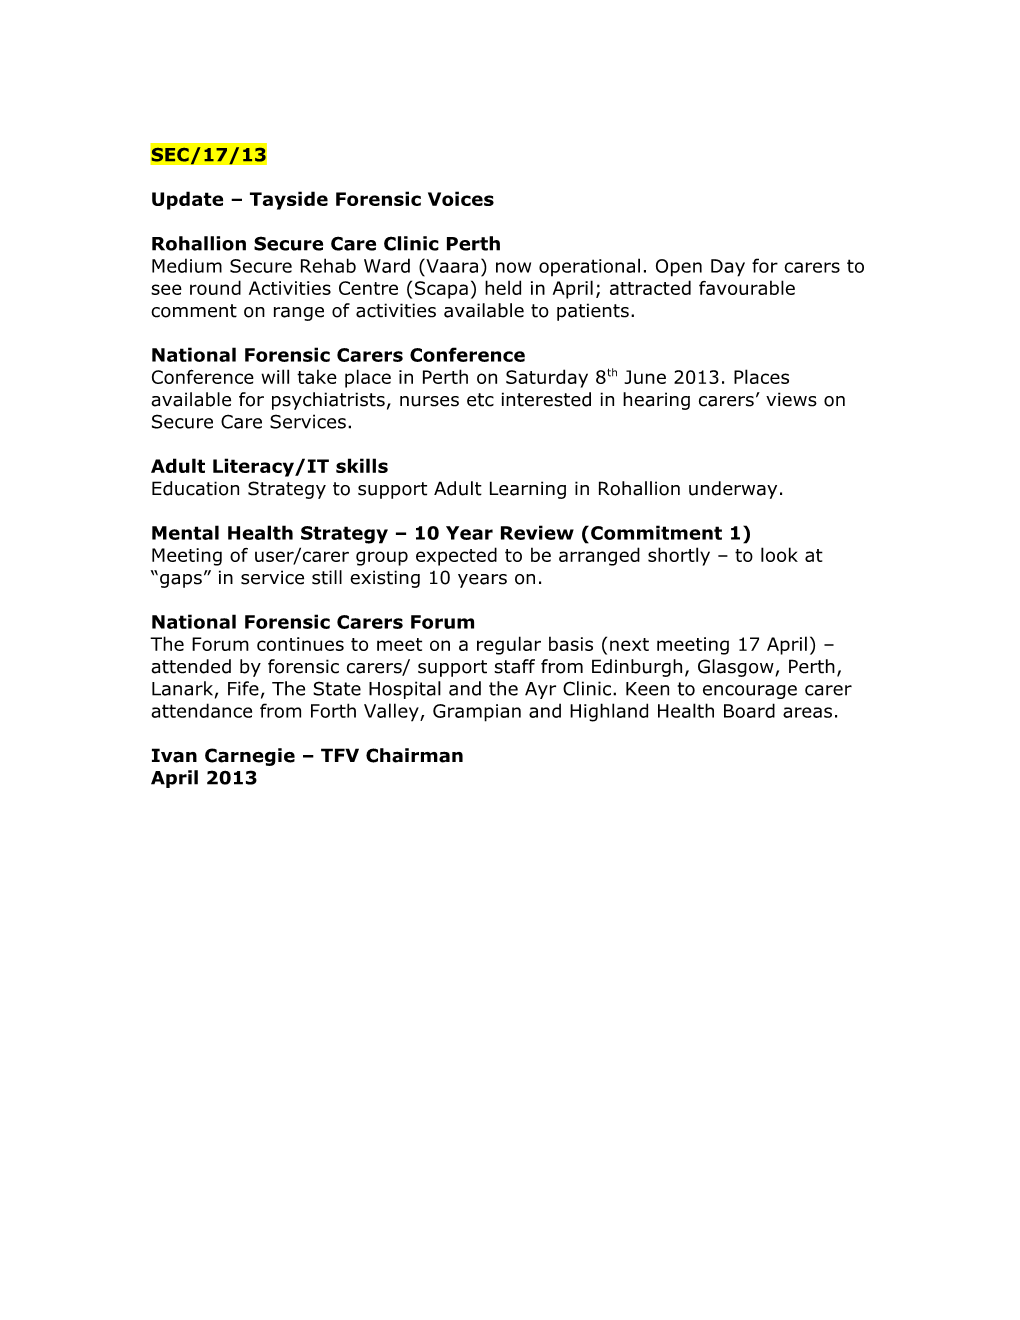 Update Tayside Forensic Voices November 2012